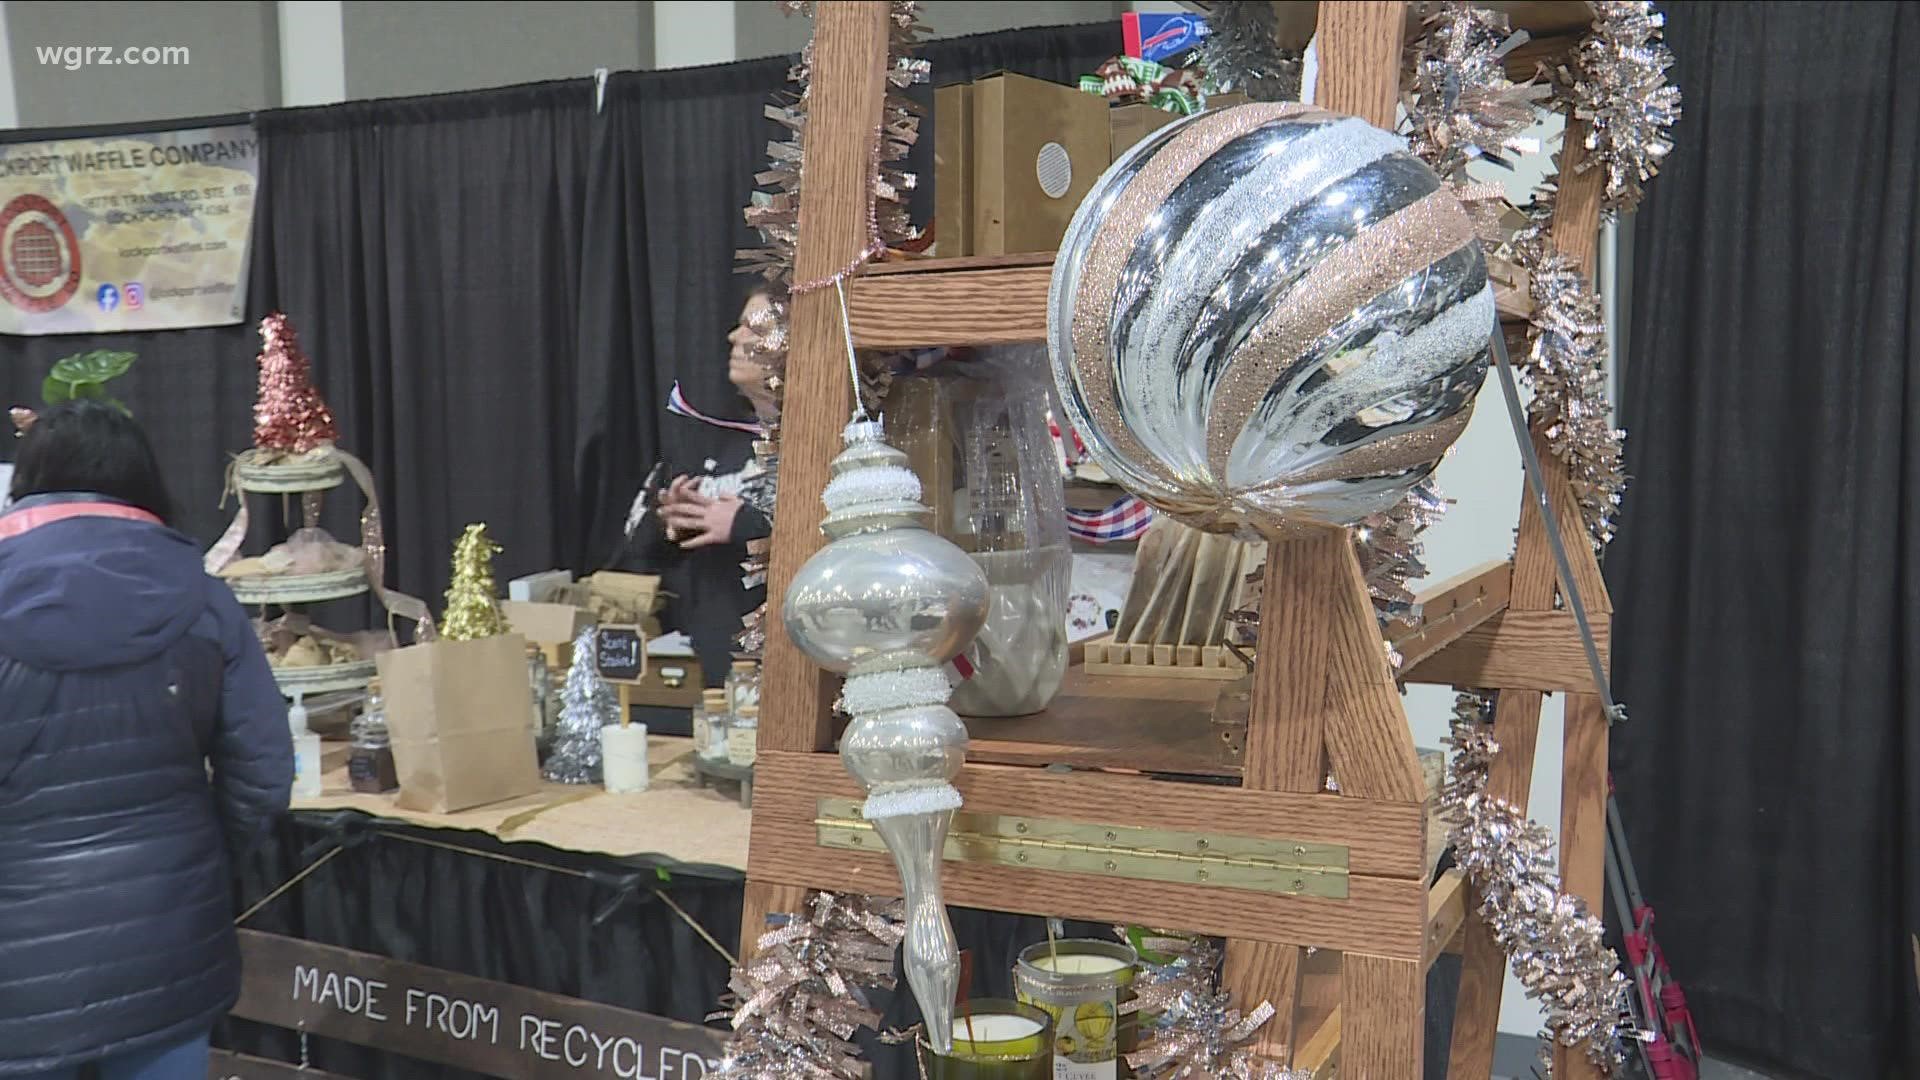 75 artisans and business owners showed off their work inside the Niagara Falls Event Center. They also had a petting zoo and other fun for families and shoppers